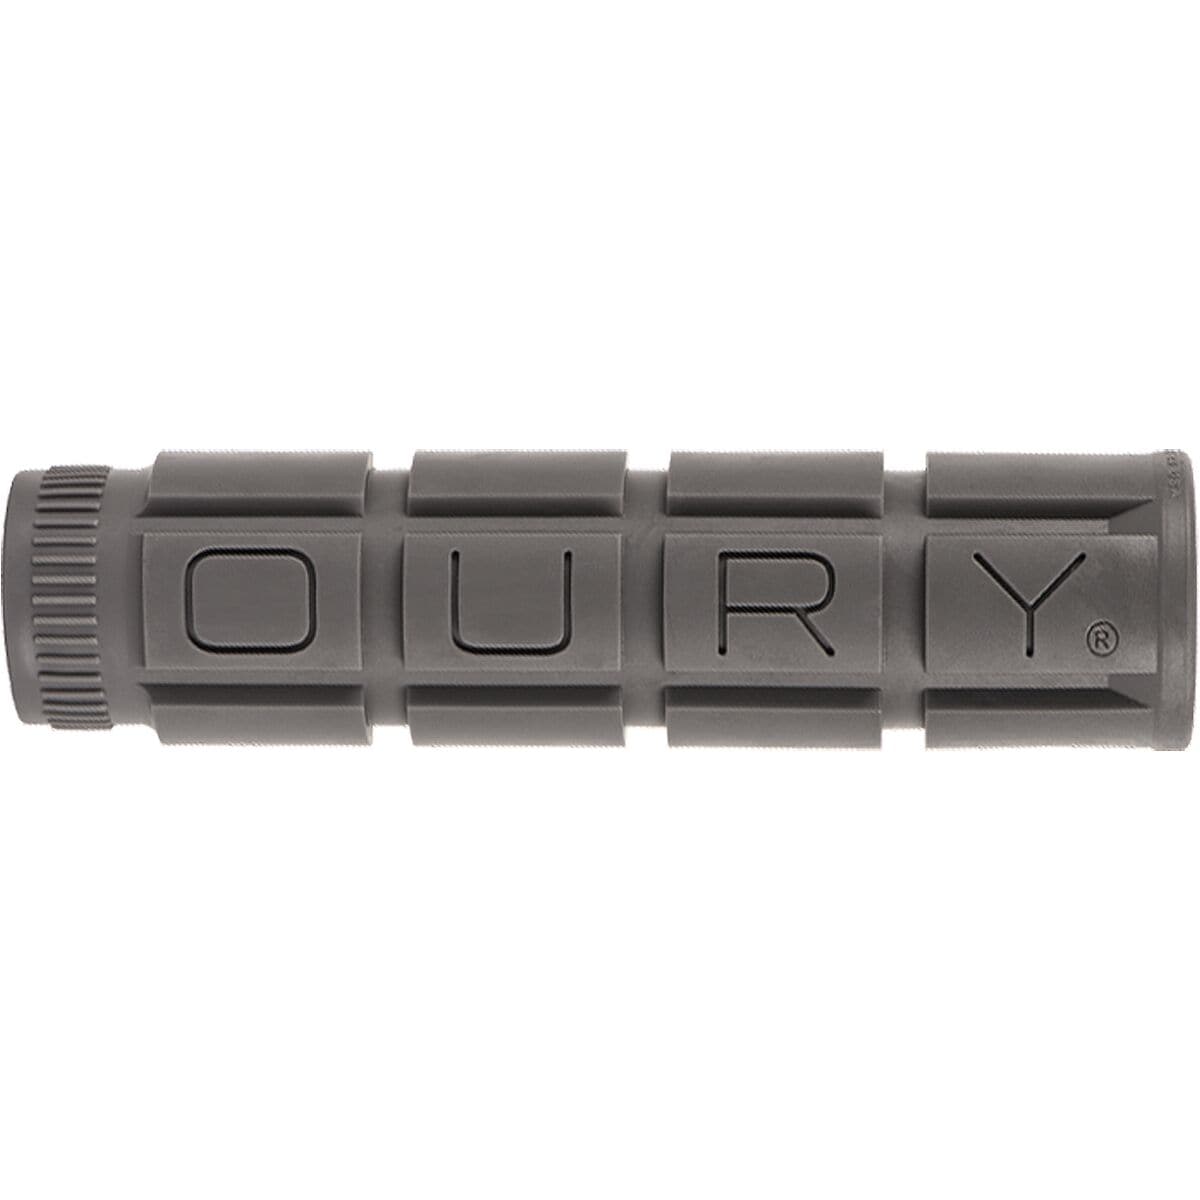 Oury Grip Single Compound V2 Grips Graphite, Pair